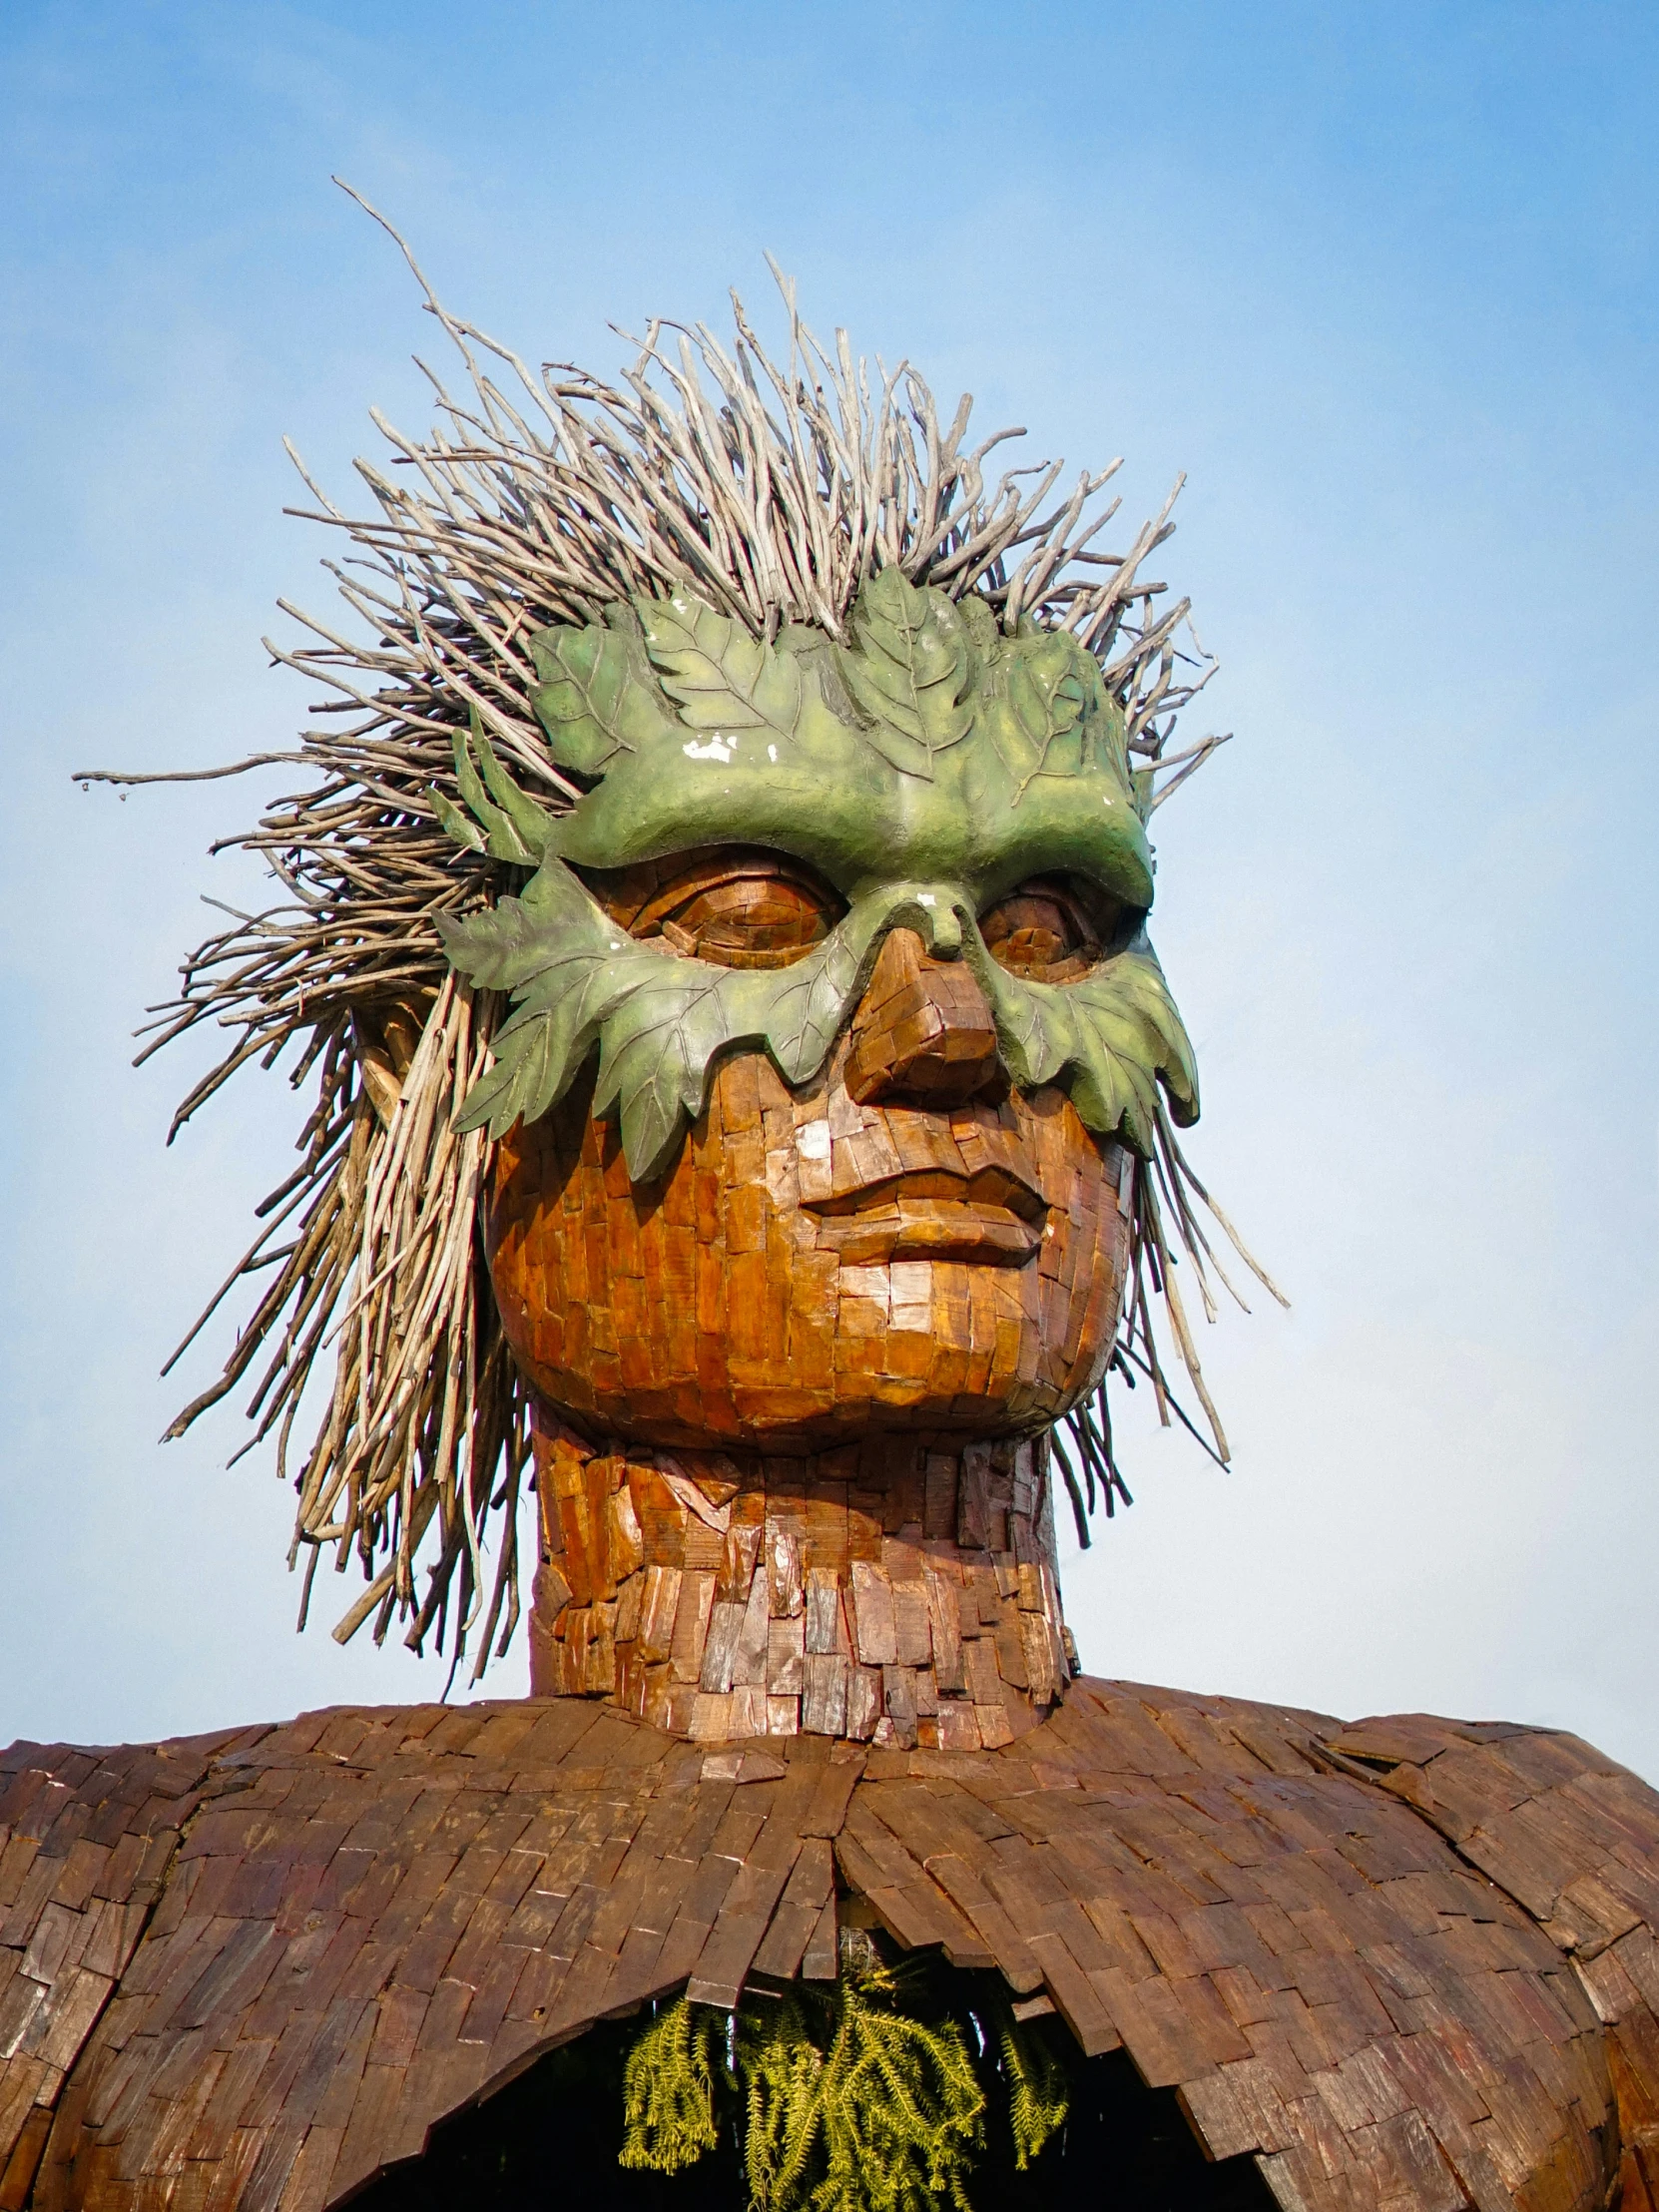 a wooden carving sculpture of a man with spiked hair